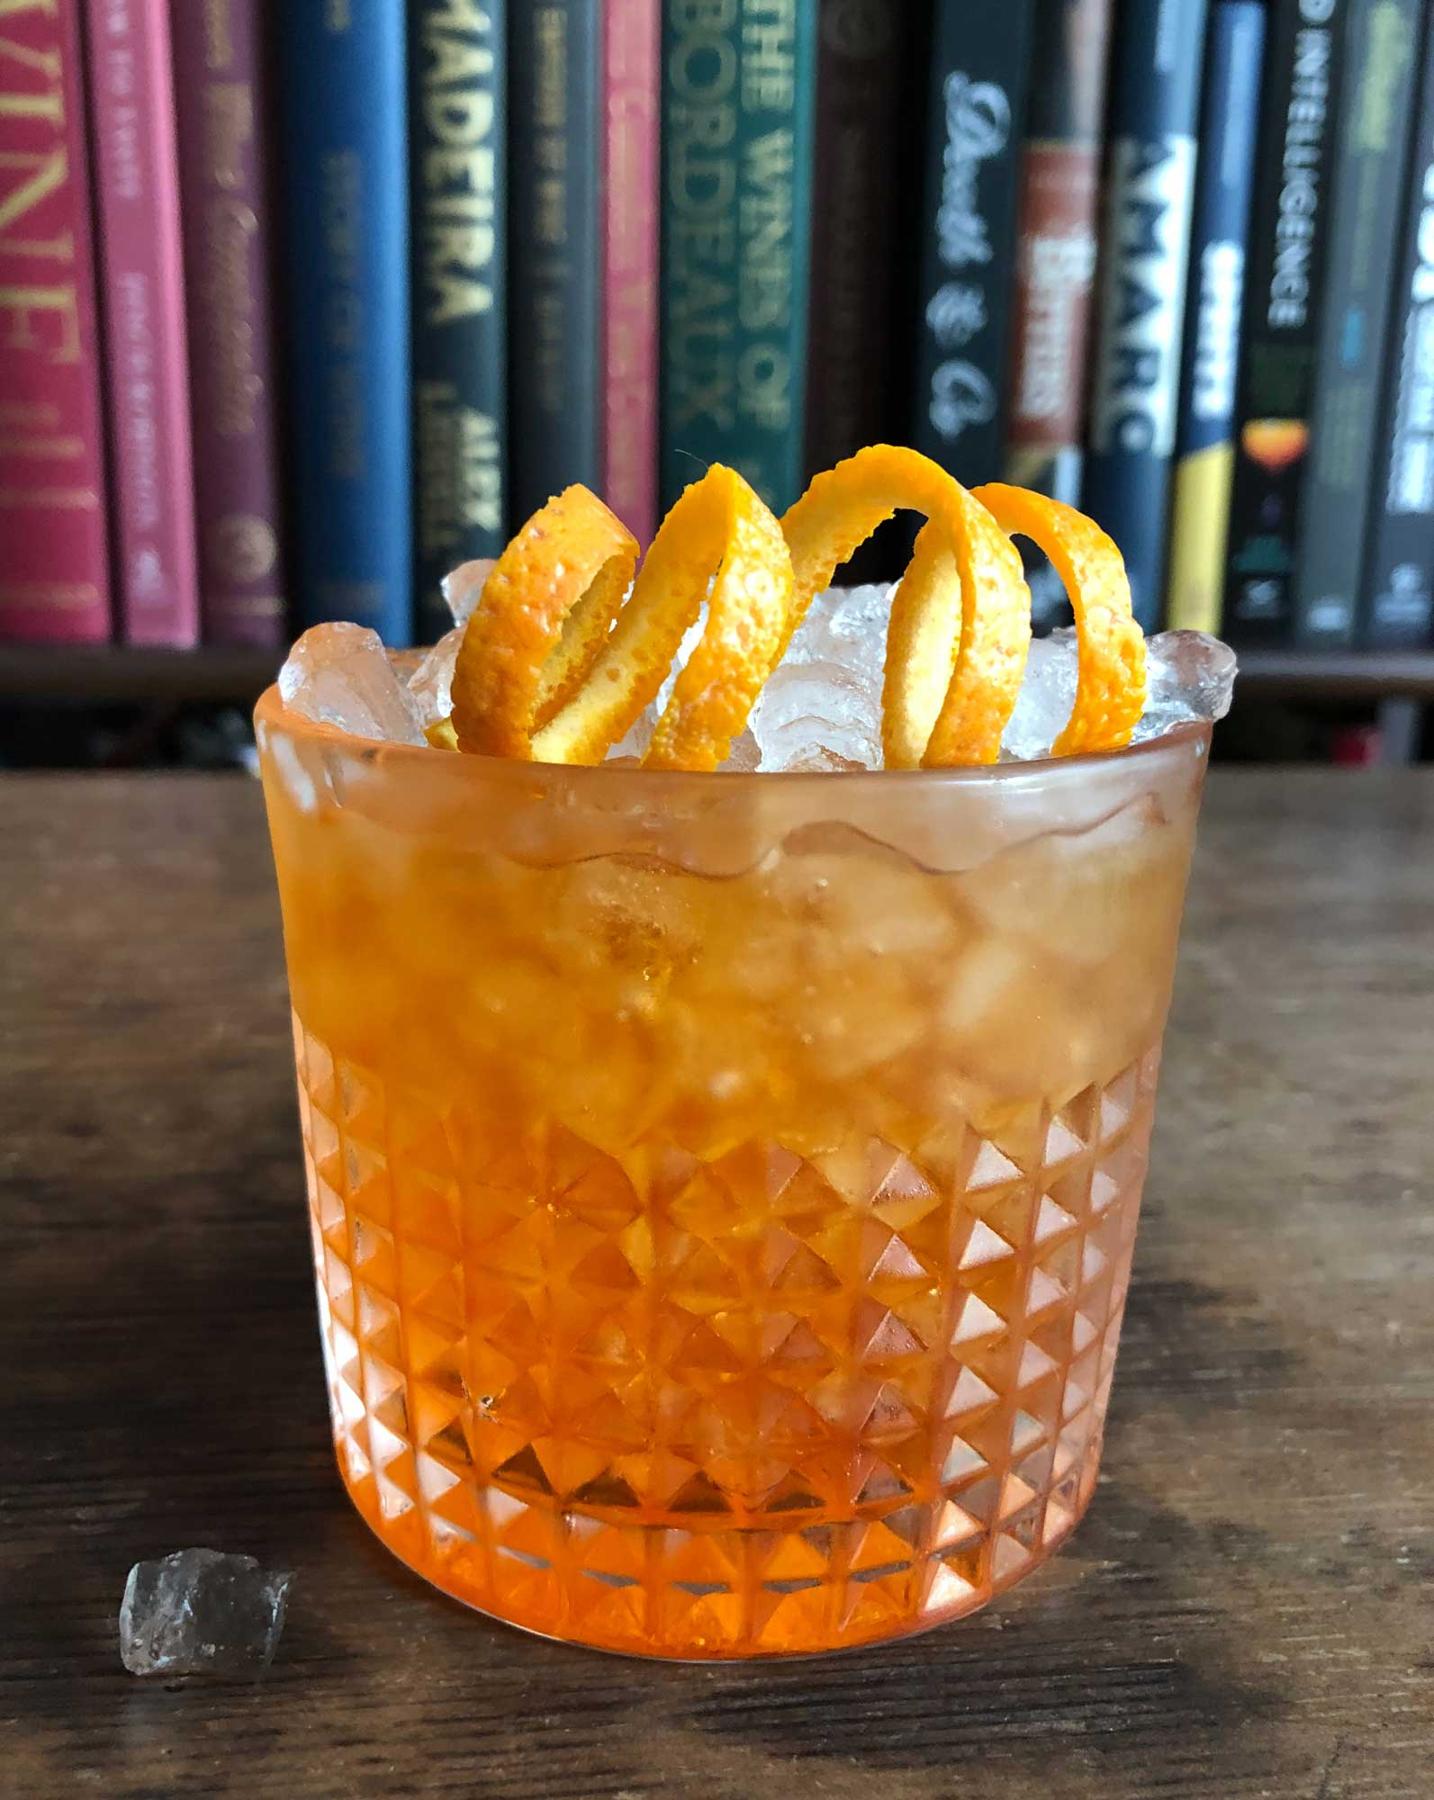 An example of the Negroni Sbagliato, the mixed drink (drink) featuring sparkling wine, Aperitivo Cappelletti, Cocchi Vermouth di Torino ‘Storico’, and orange twist; photo by Lee Edwards